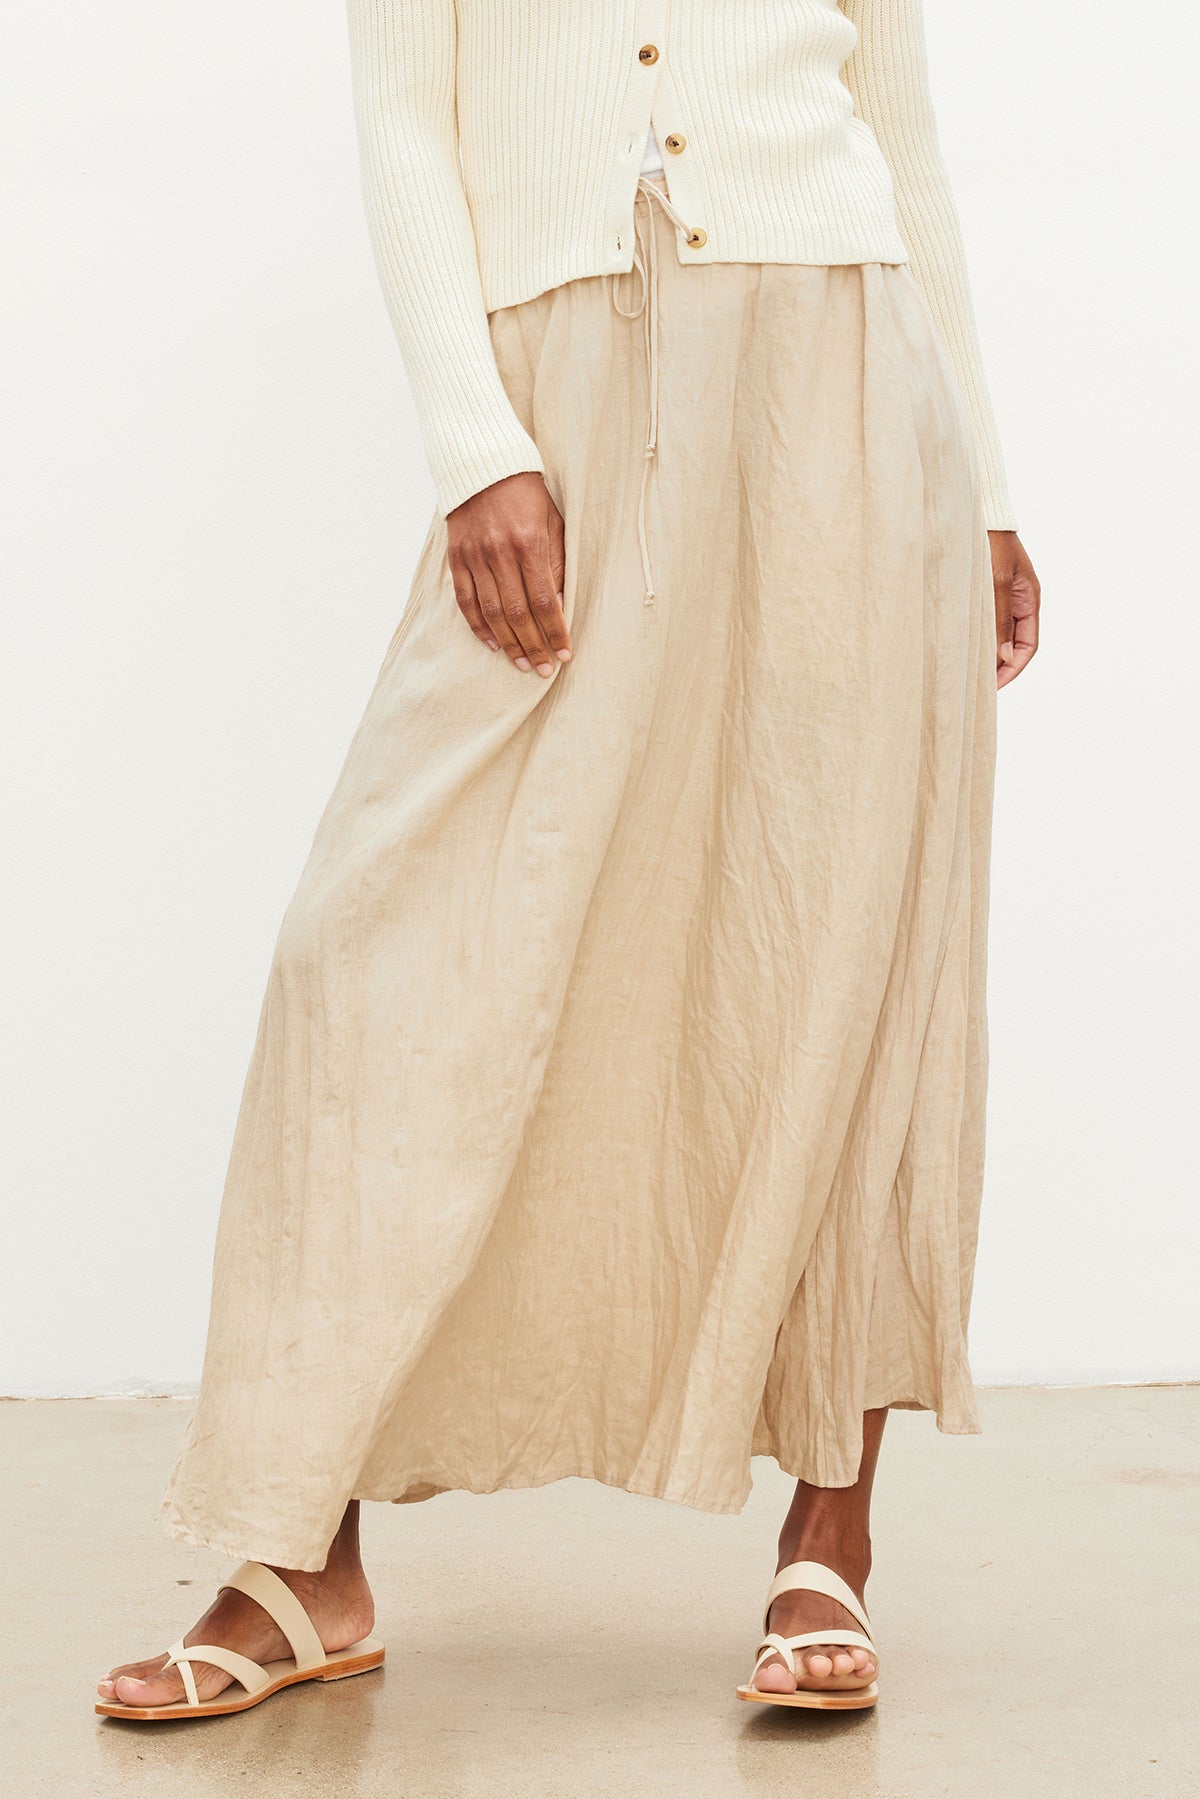   The model is wearing a Velvet by Graham & Spencer BAILEY LINEN MAXI SKIRT with an elastic drawstring waist and white sweater. 